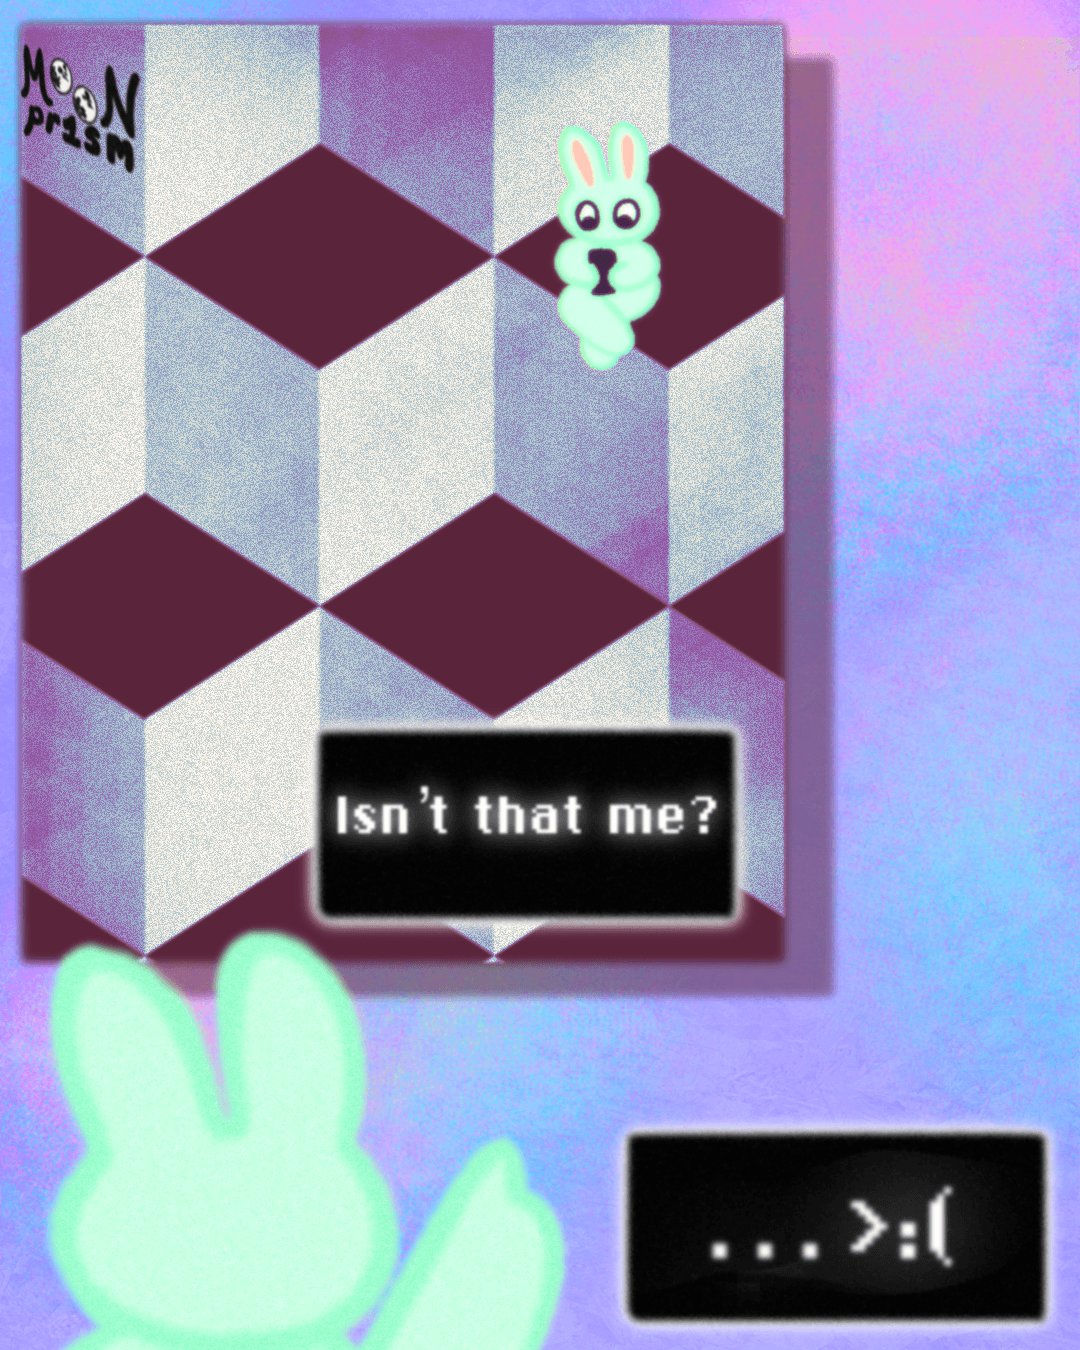 An illustration of a mint green rabbit pointing at a painting on the wall depicting themself sitting on a 3d cube structure looking down at their phone. There are two black text boxes, one says 'Isn't that me?' and the other shows an emoticon frown with angry eyebrows.